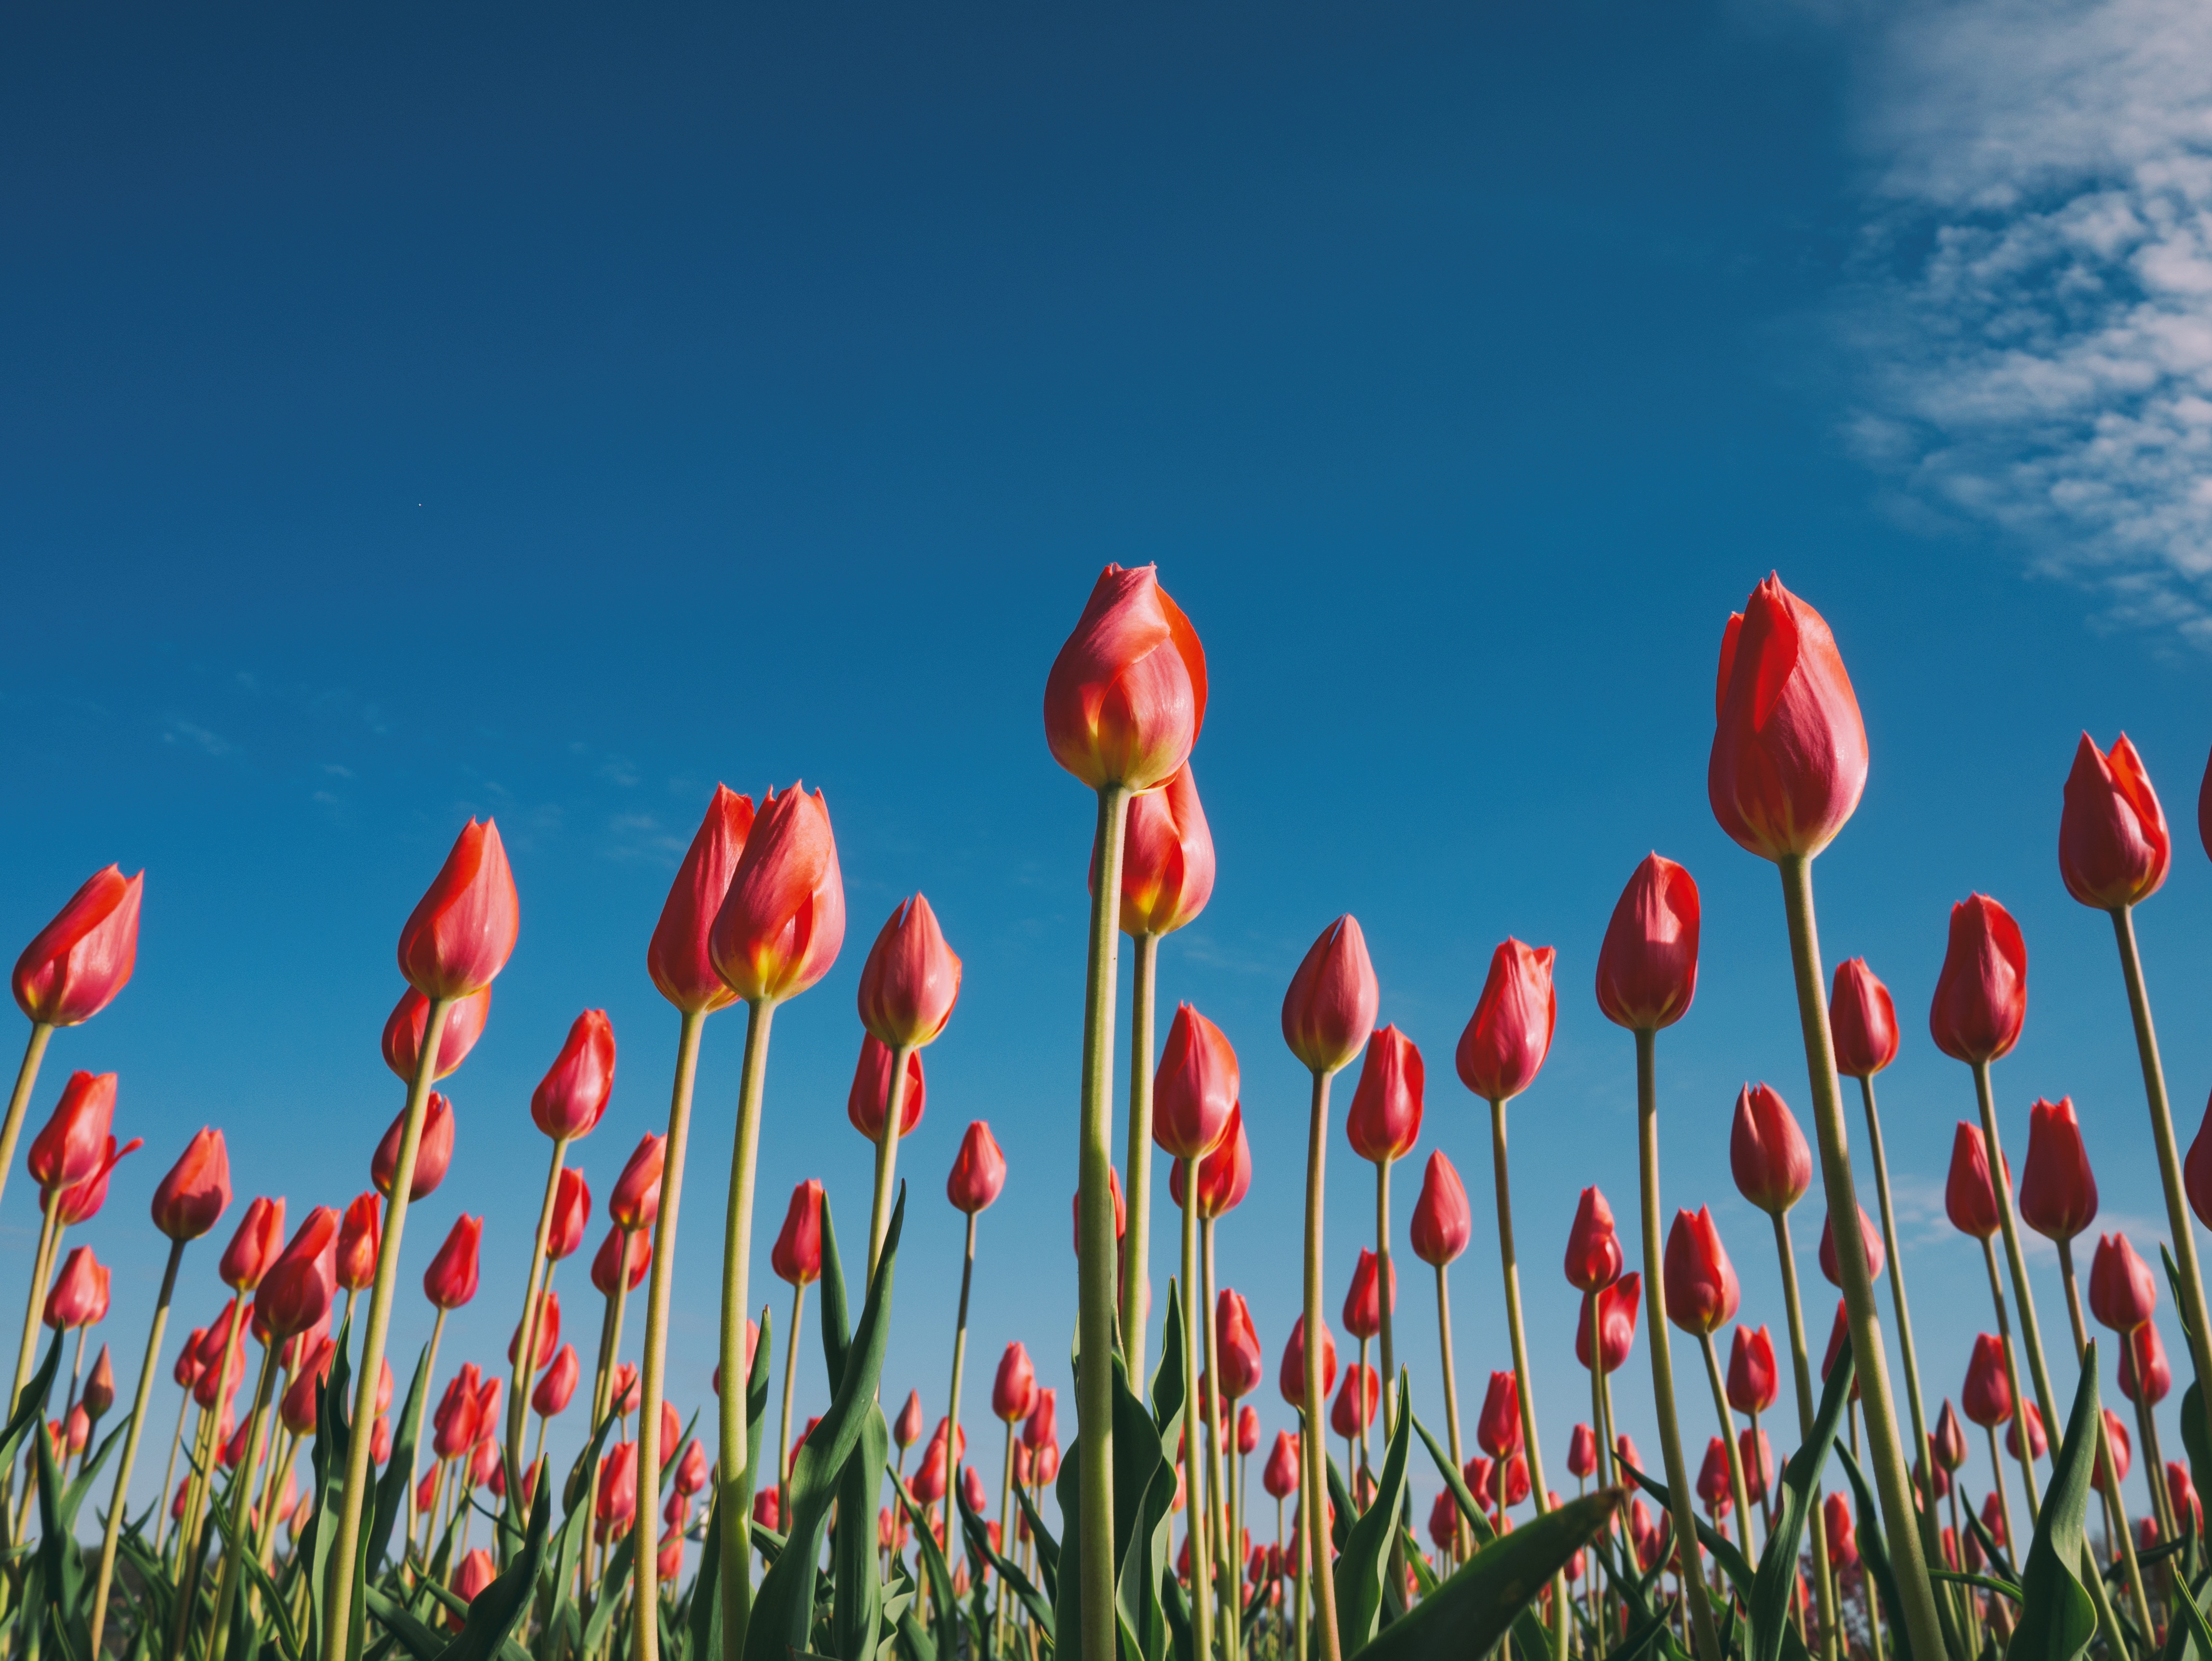 How the innaccurate accounting of the tulip market hysteria has become a stand-in for current cryptocurrency bubble concerns.   When I first got into cryptocurrencies, I never imagined that it would lead to writing about flowers.    But these days, when reading about crypto markets, you can’t get very far before stumbling over some reference to the tulipmania that gripped the Netherlands in the 1600s. For some reason, many finance pundits and commentators feel like the 17th century craze over tulips is a great way to explain cryptocurrency market dynamics.    But, is tulipmania really a good warning flag for the riptides of the free market?     Hed The flower bulb bubble   Last week, I wrote a little bit about how cryptocurrency regulations in development may or may not change the landscape of what digital assets look like and how they are used.    While doing some background reading for that piece, I kept coming across the reference to the tulip mania that happened in what is now known as the Netherlands during the 1600s and allegedly cratered the whole Dutch economy.   So, following a mild curiosity, I thought I would look into it some more.    Turns out, the whole thing is a little bit of fake news.    Summarizing secondhand what comes from the book Tulipmania: Money, Honor, and Knowledge in the Dutch Golden Age, tulips are native to the mountain valleys where China and Tibet intersect with Afghanistan and Russia. The flowers, recognized for their beauty and delicate intricacies, were brought to Istanbul where they were cultivated for centuries, eventually becoming the favored garden fixture of the emperors of the Ottoman Empire.    During the latter part of the 1500’s, during a decades-long war with Spain, the Dutch were experiencing a demographic and cultural shift. International commerce and trading were taking off at the time, creating a crust of wealthy merchants and traders living in Dutch cities.   The profits from these new ventures funded new indulgences. At the time, social and cultural interests leaned toward nature and things that were exotic, which intersected perfectly around tulips.    And not just any tulips, Dutch traders were particularly interested in broken tulip bulbs, which is a variety of flower that produces patterned or multicolored petals, which are actually the result of a virus.    Merchants attracted investors, formed specialized companies, and started pumping broken tulip bulbs. All of which fits neatly into a crypto analogy.    Prices for tulip bulbs rose to astronomical heights, but eventually the whole thing folded when the new bulb companies began defaulting on their payments to traders. The fallout from the collapsed tulip trade had larger financial ripples and eventually led to a stagnate economy.    That’s the way the story has gone up until this point. But, in an interview in Smithsonian magazine, Anne Goldgar, the professor of early modern history at King’s College in London, who wrote the book Tulipmania, the bursting of the great tulip didn’t have the dire economic consequences that were originally reported.    “There weren’t that many people involved and the economic repercussions were pretty minor,” Goldgar told Smithsonian. “I couldn’t find anybody that went bankrupt. If there had been really a wholesale destruction of the economy as the myth suggests, that would’ve been a much harder thing to face.”   Hed Tulipmania: Tale of crypto warning, or fantastical flower story?   While the exact details of the Dutch tulipmania might not be totally accurate, the value of the parable still holds up: People went a little crazy and lost some money.    And we don’t need to look 400 years in the past to search for examples of what happens when economic bubbles burst.   After all, we have seen bubble before —  most recently, the housing bubble in the 2000s and dot-com bubble of the 1990s.    The point, is that economics and markets do not always behave rationally and that participating and investing in the emerging cryptoeconomy should be done carefully. And, we should always check facts and do our own due diligence, even if the facts lead us down rabbit holes about flower trading from centuries ago.